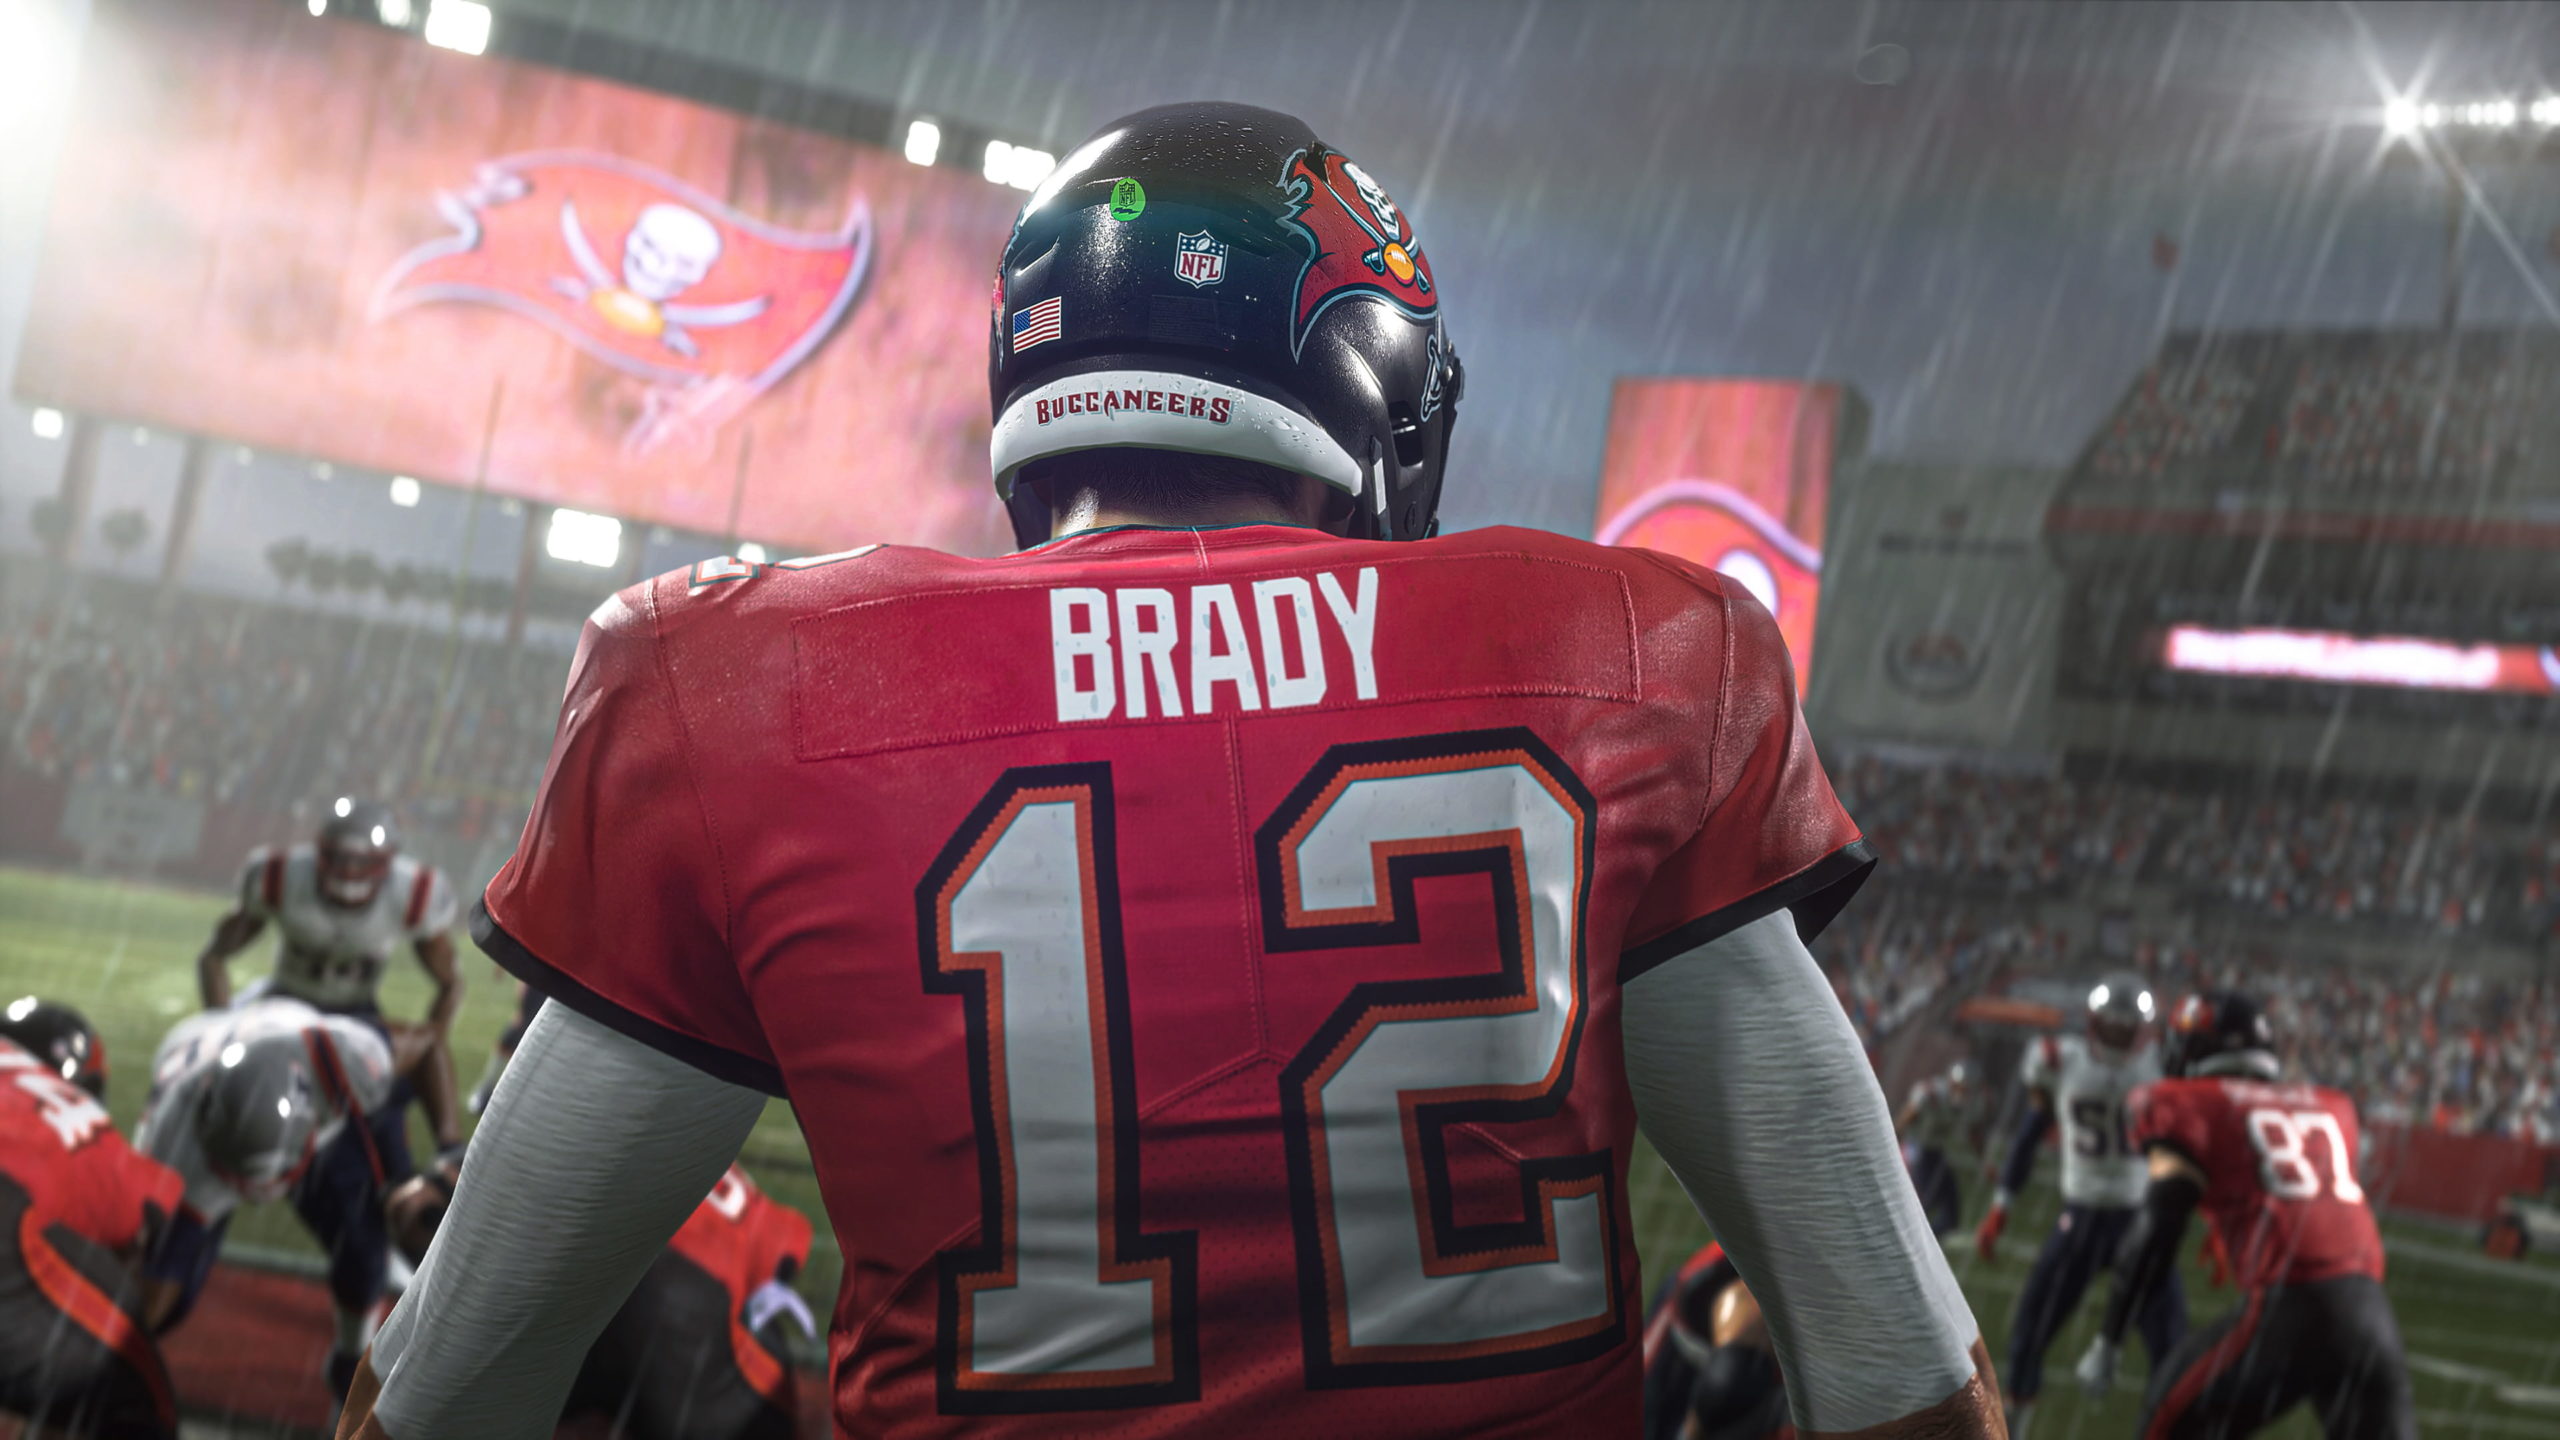 Madden NFL 21 will be Free to Play From January 28-31 on All